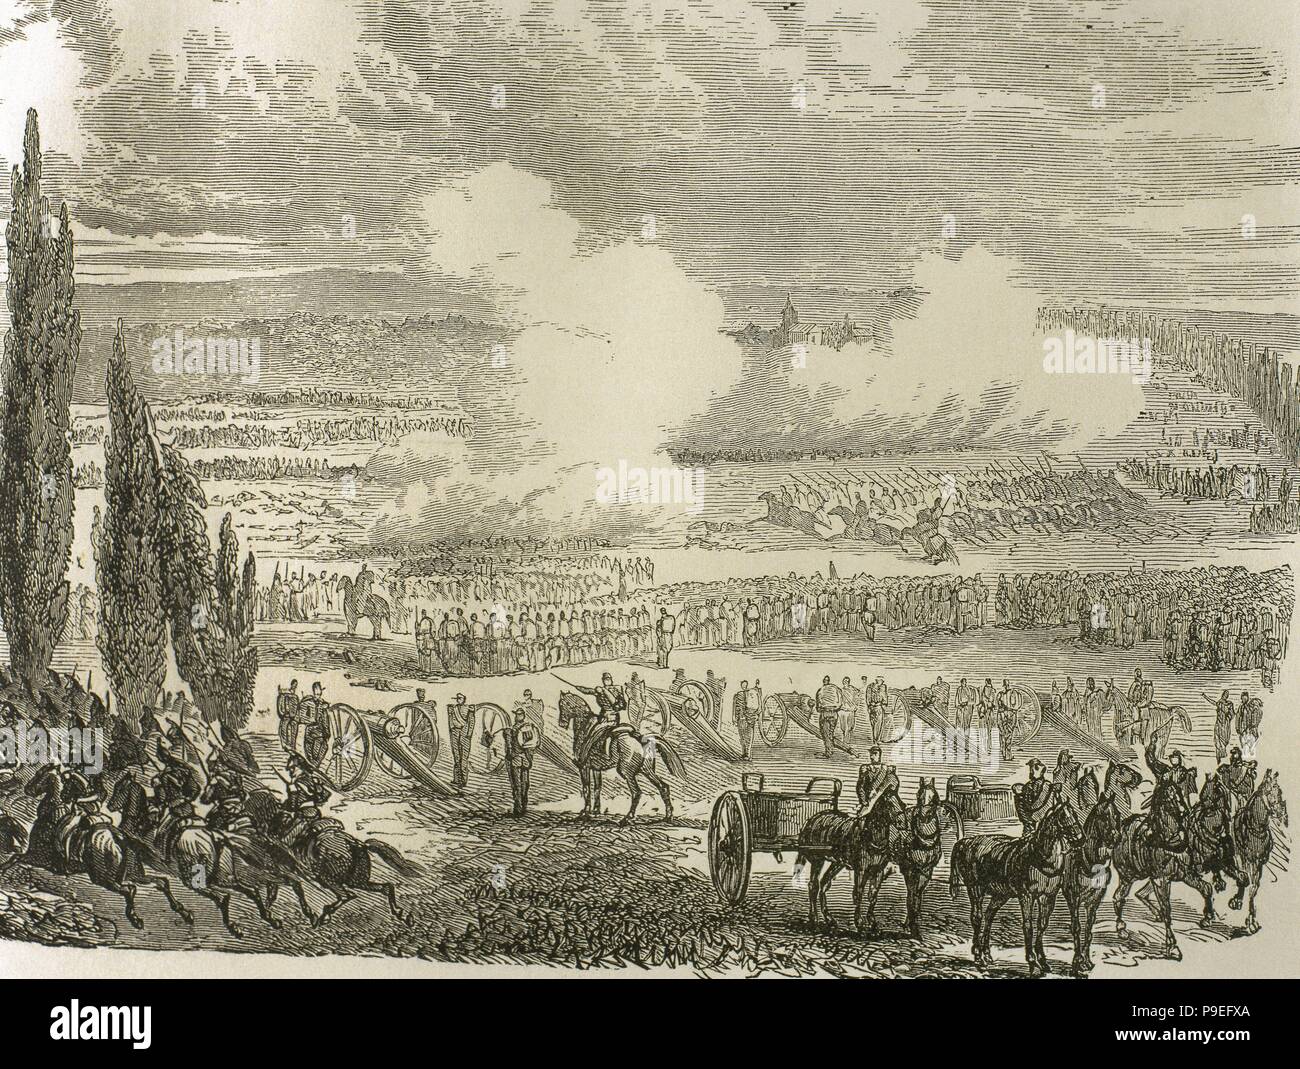 Franco-Prussian War (1870-1871). Battle of Worth, known as the Battle of Reichshoffen or the Battle of Froeschwiller, 6 August, 1870. Engraving. 'Historia Universal', 1881. Stock Photo